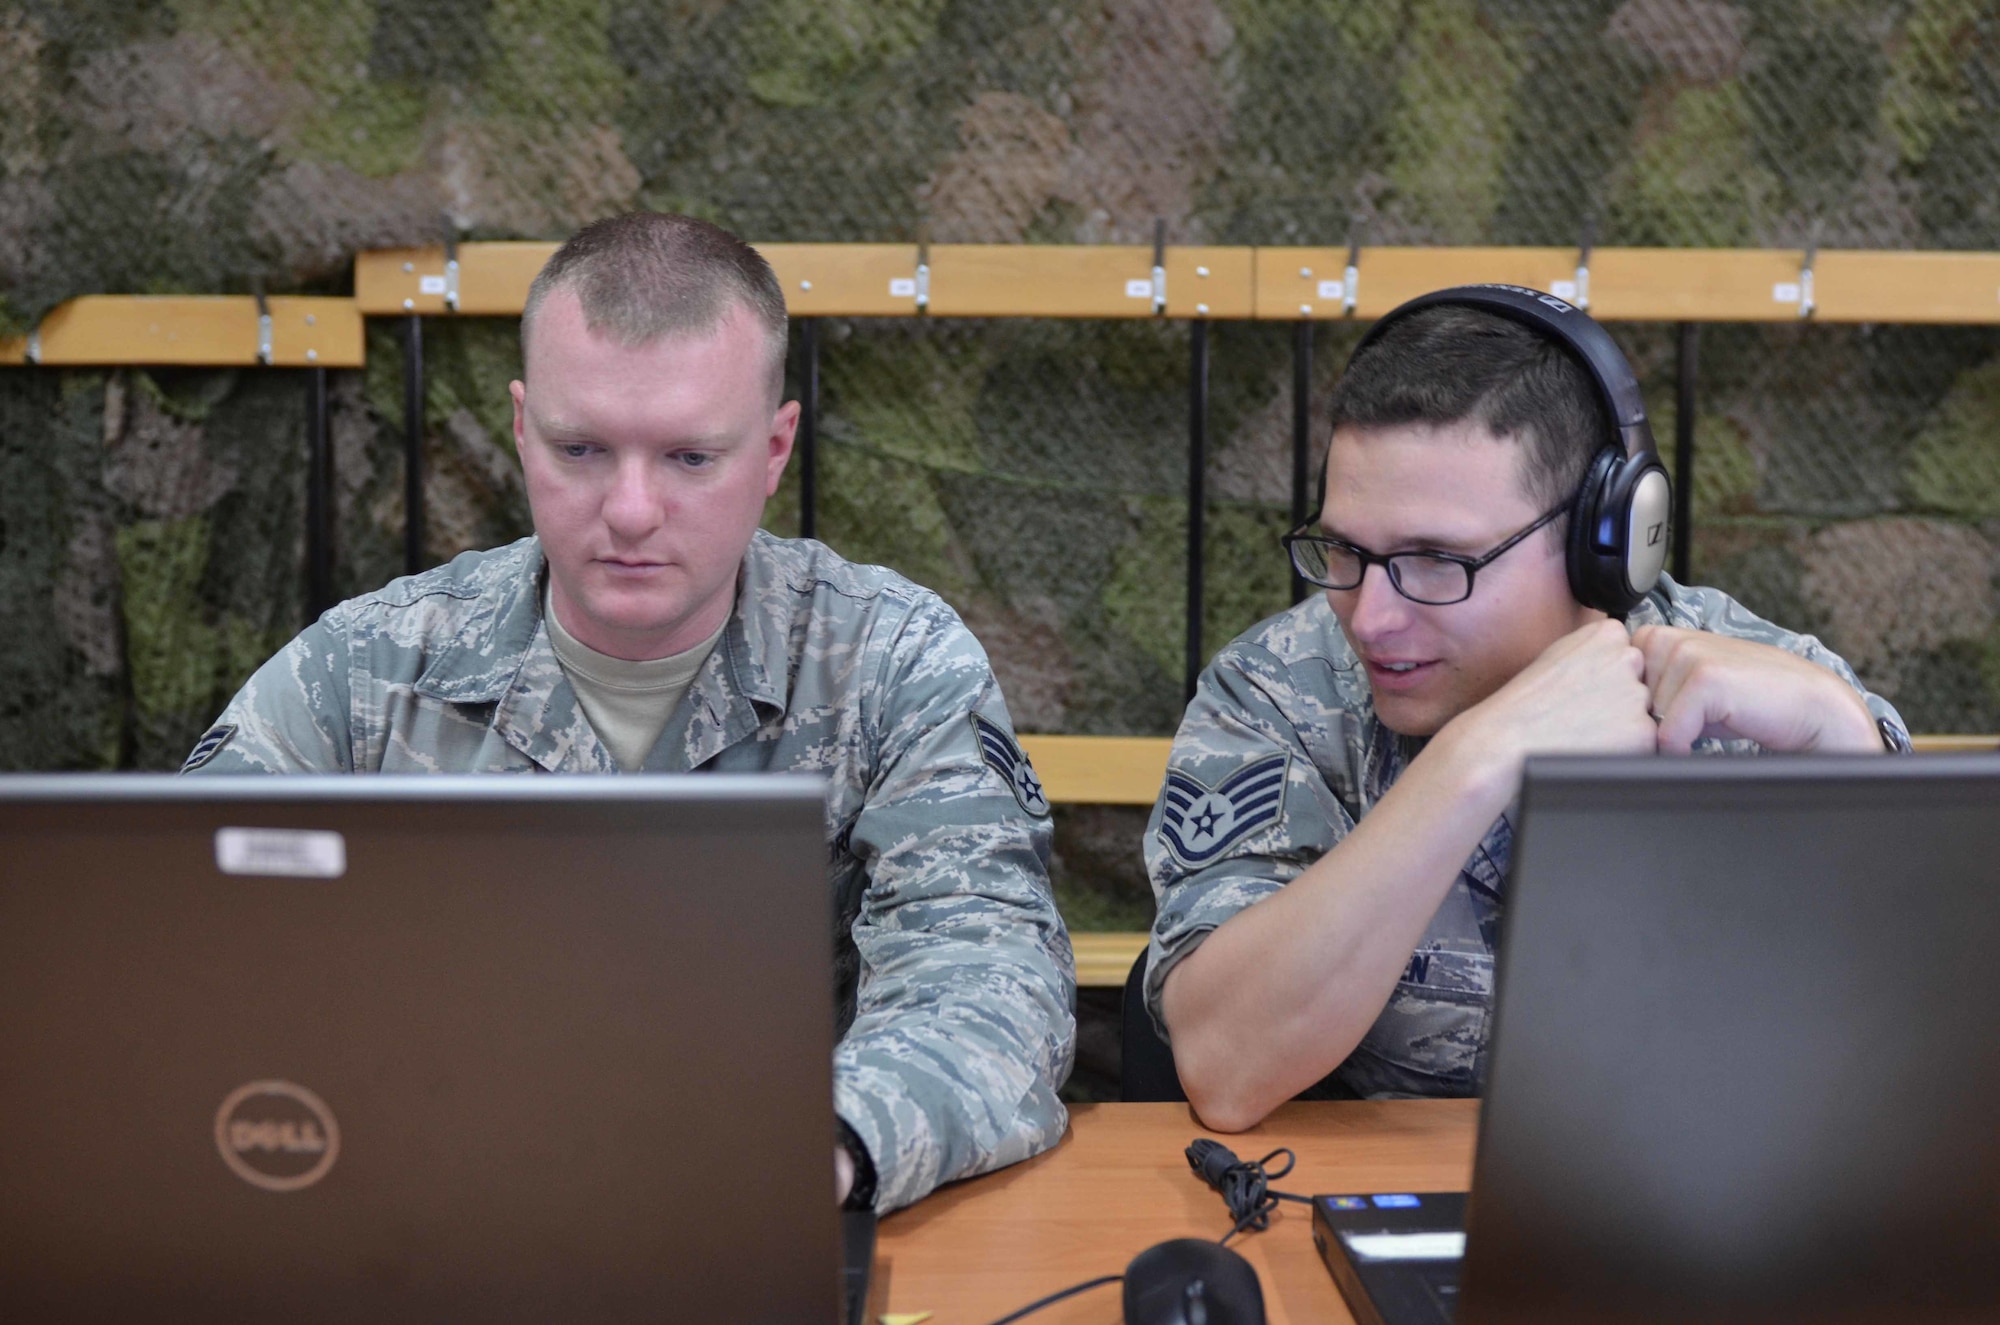 Senior Airman Steven Adkins, a broadcast journalist assigned to American Forces Network, Spangdahlem Air Base, Germany, and Staff Sgt. Ben Wocken, a broadcast journalist assigned to American Forces Network Europe Regional Media Center, review a video they are producing for Saber Strike 15 on June 7, 2015, in the Drawsko Pomorskie Training Area in Poland. Saber Strike is a long-standing U.S. Army Europe-led cooperative training exercise. This year’s exercise objectives facilitate cooperation amongst the U.S., Estonia, Latvia, Lithuania, and Poland to improve joint operational capability in a range of missions as well as preparing the participating nations and units to support multinational contingency operations. (U.S. Army photo by Sgt. Brandon Anderson, 13th Public Affairs Detachment/Released.)